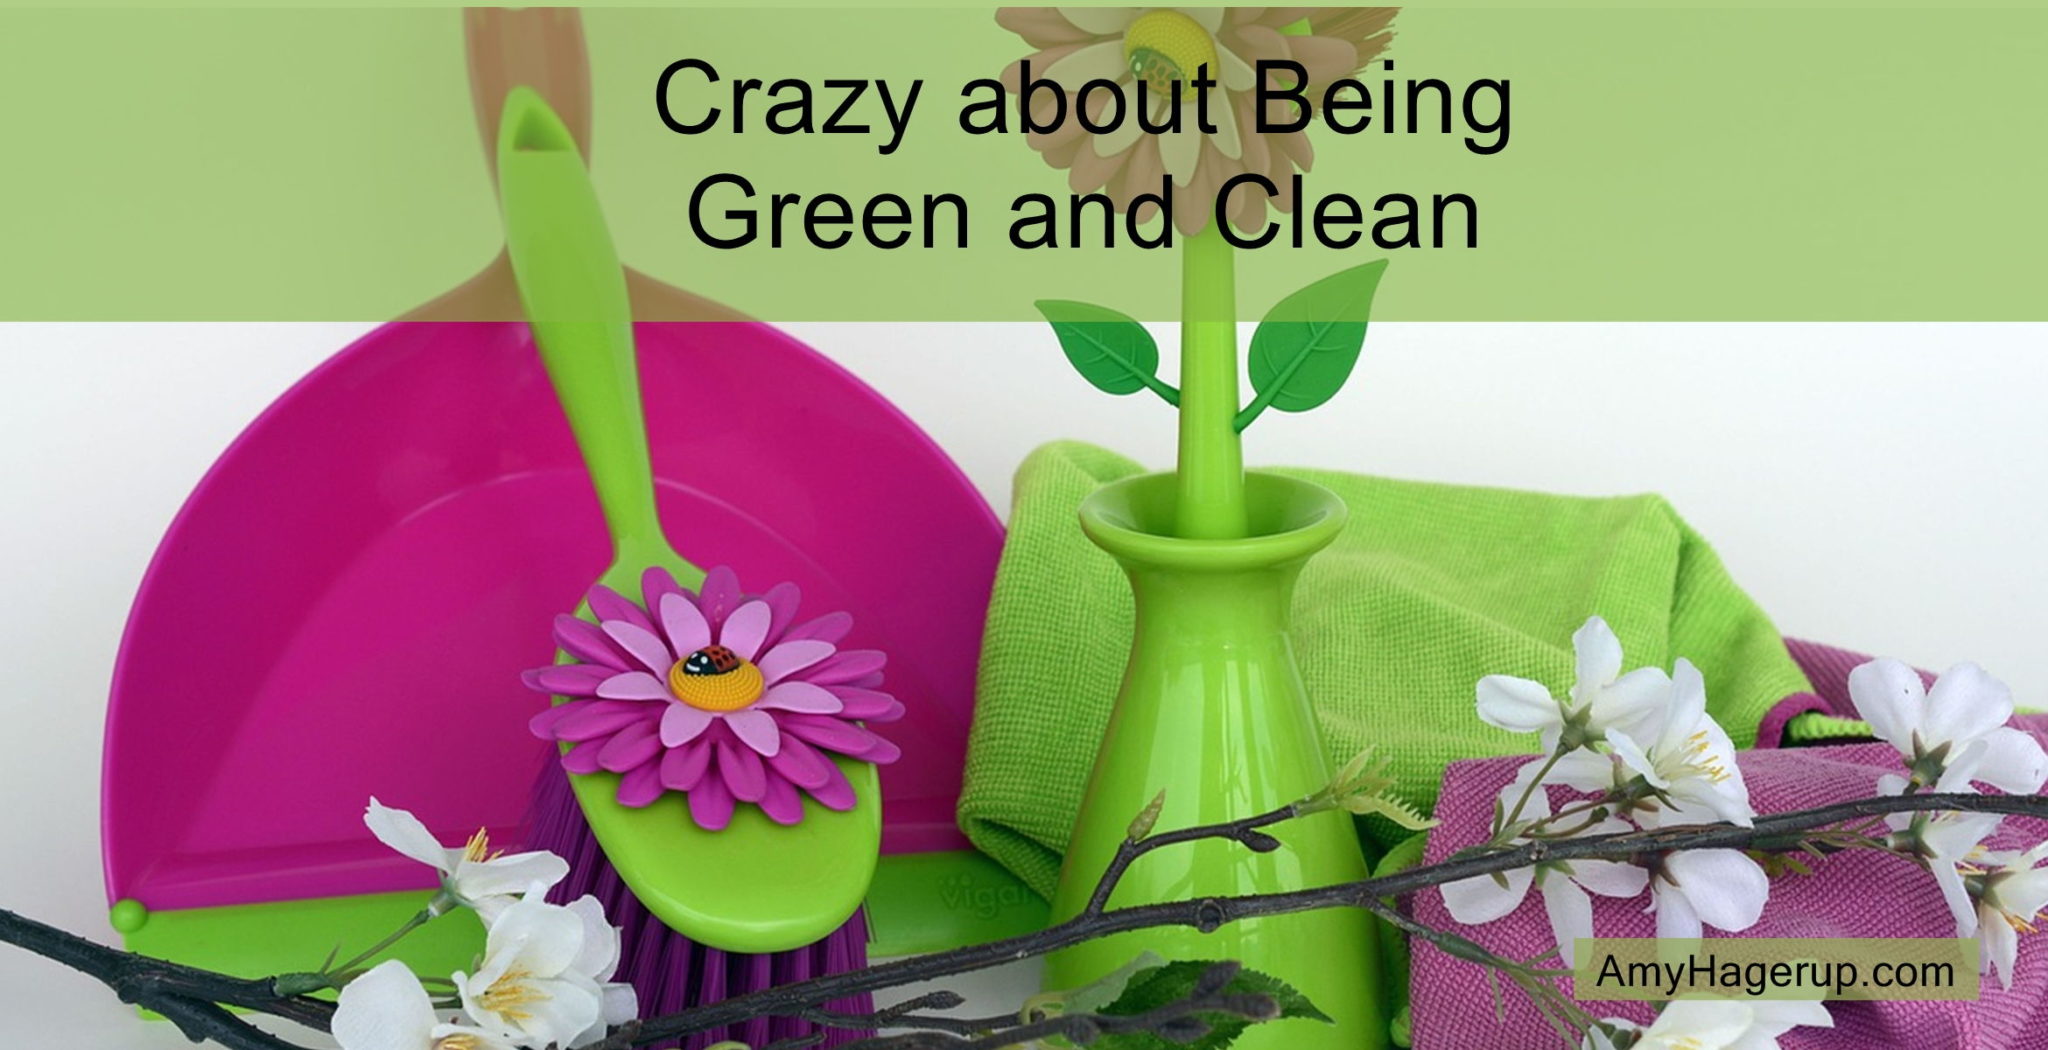 Get your home cleaned up with green cleaners. Go non-toxic all the way.